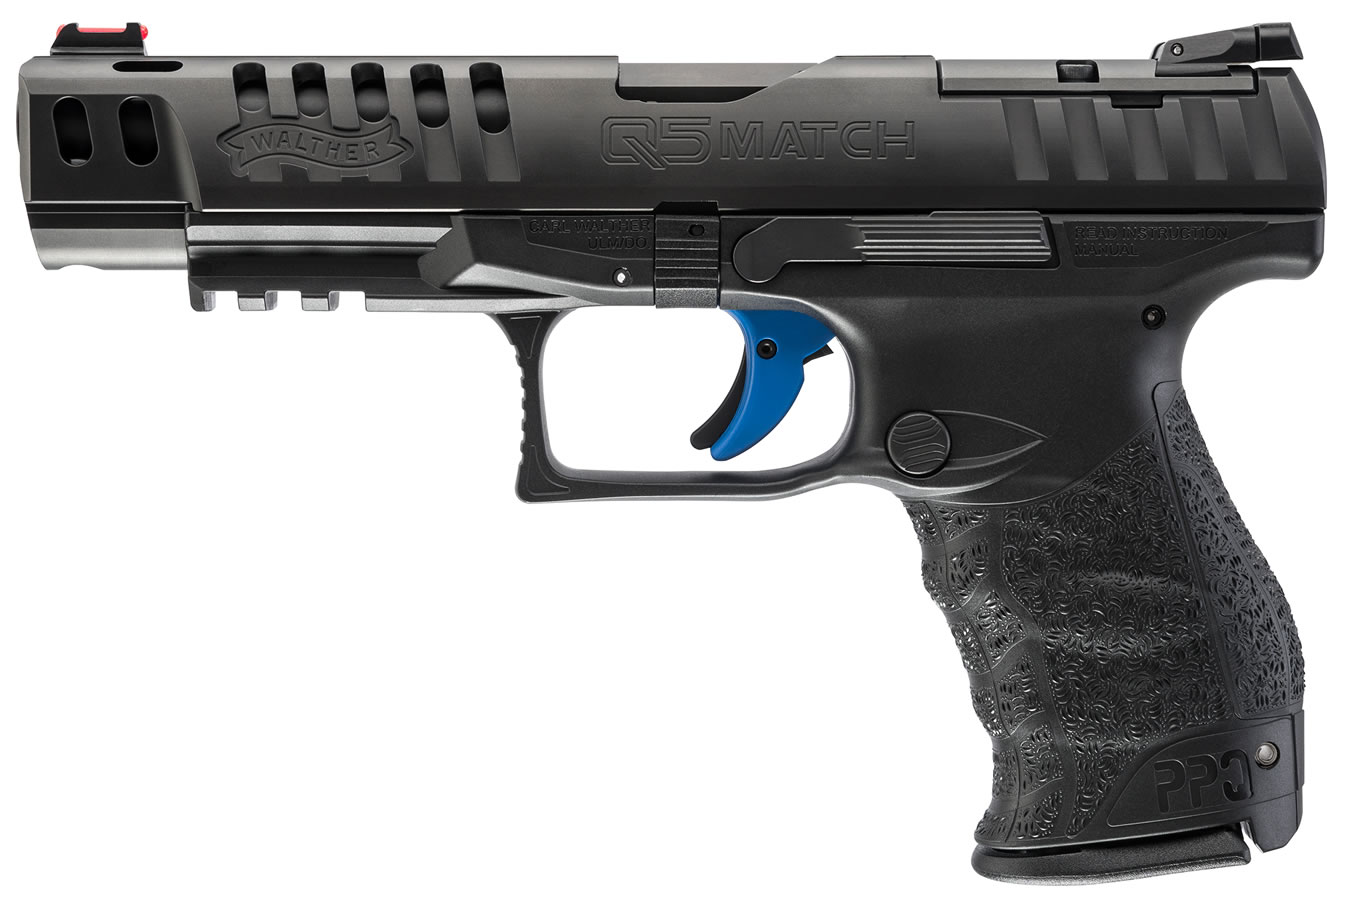 WALTHER Q5 MATCH 9MM OPTIC READY PERFORMANCE